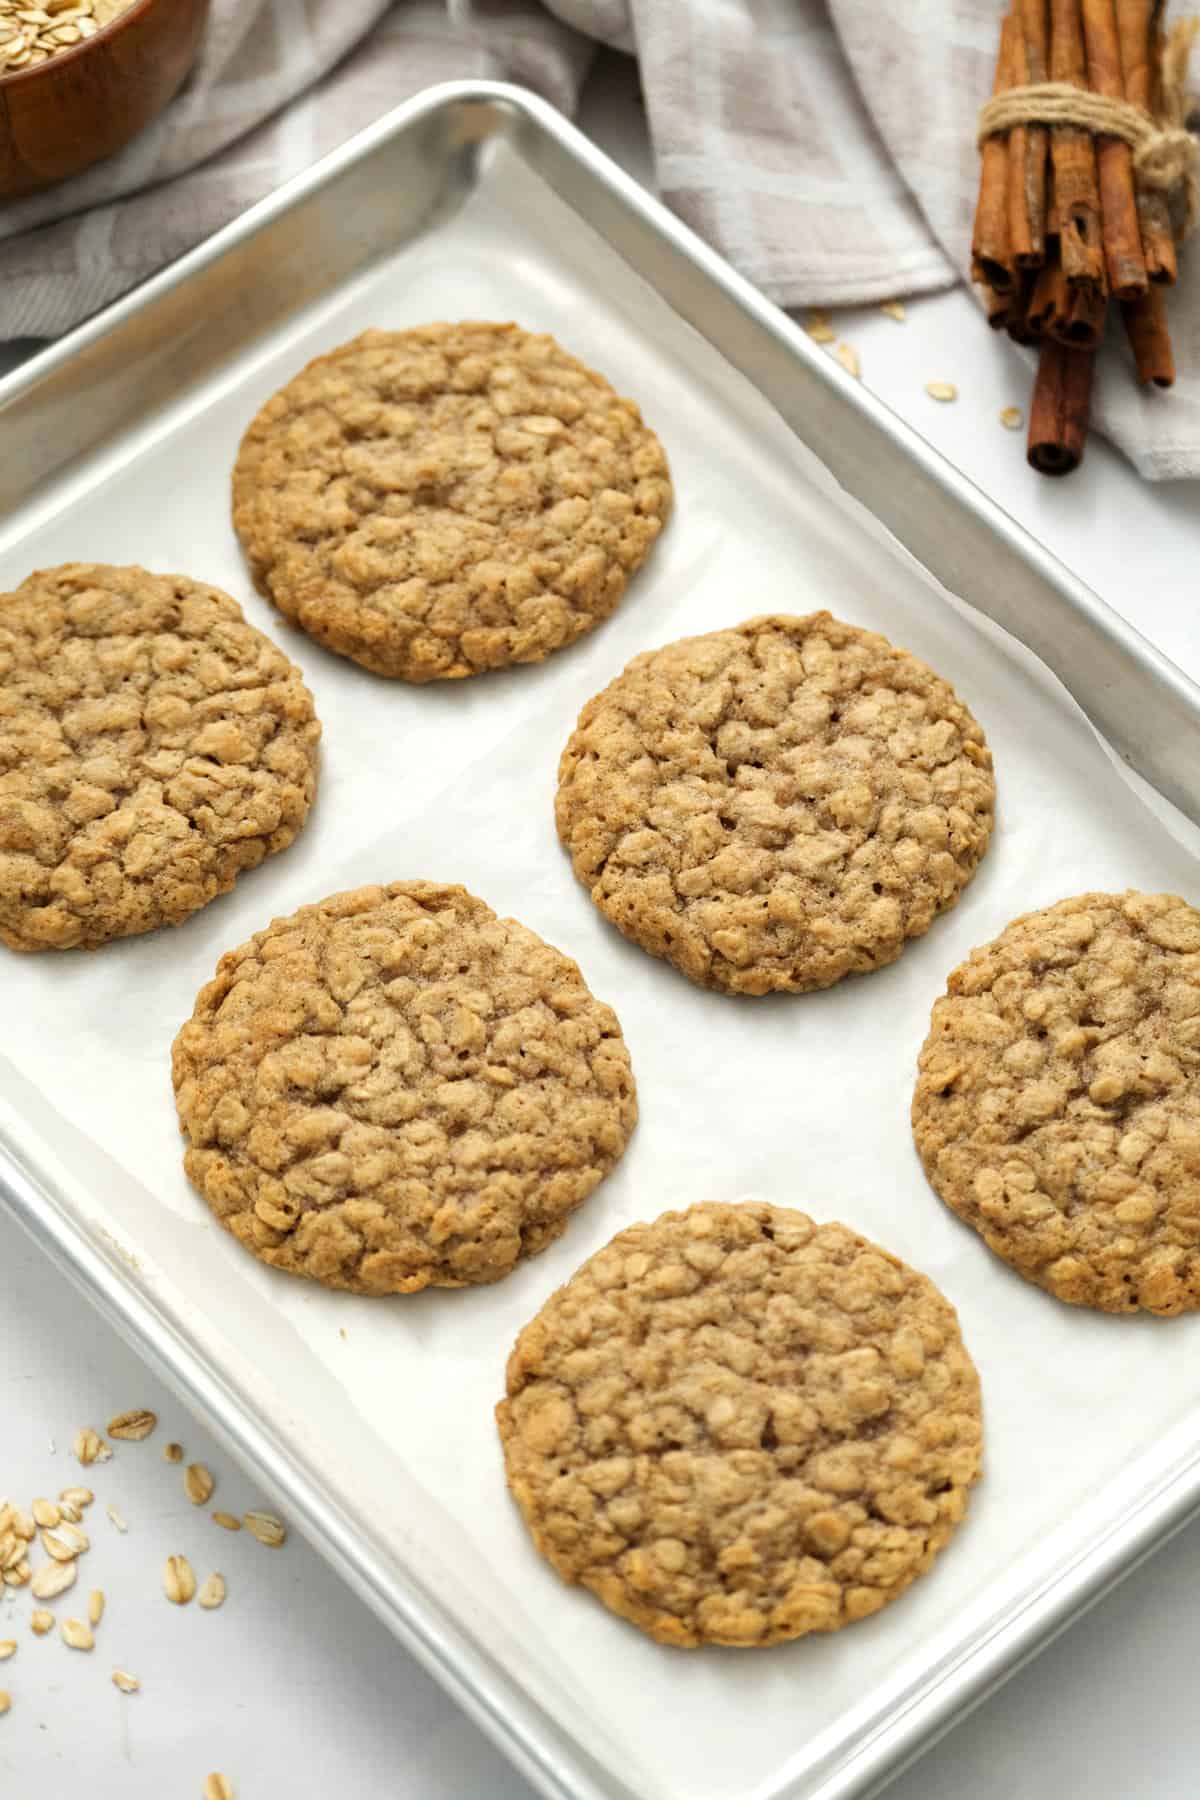 Sheet pan with baked oatmeal cookies on it